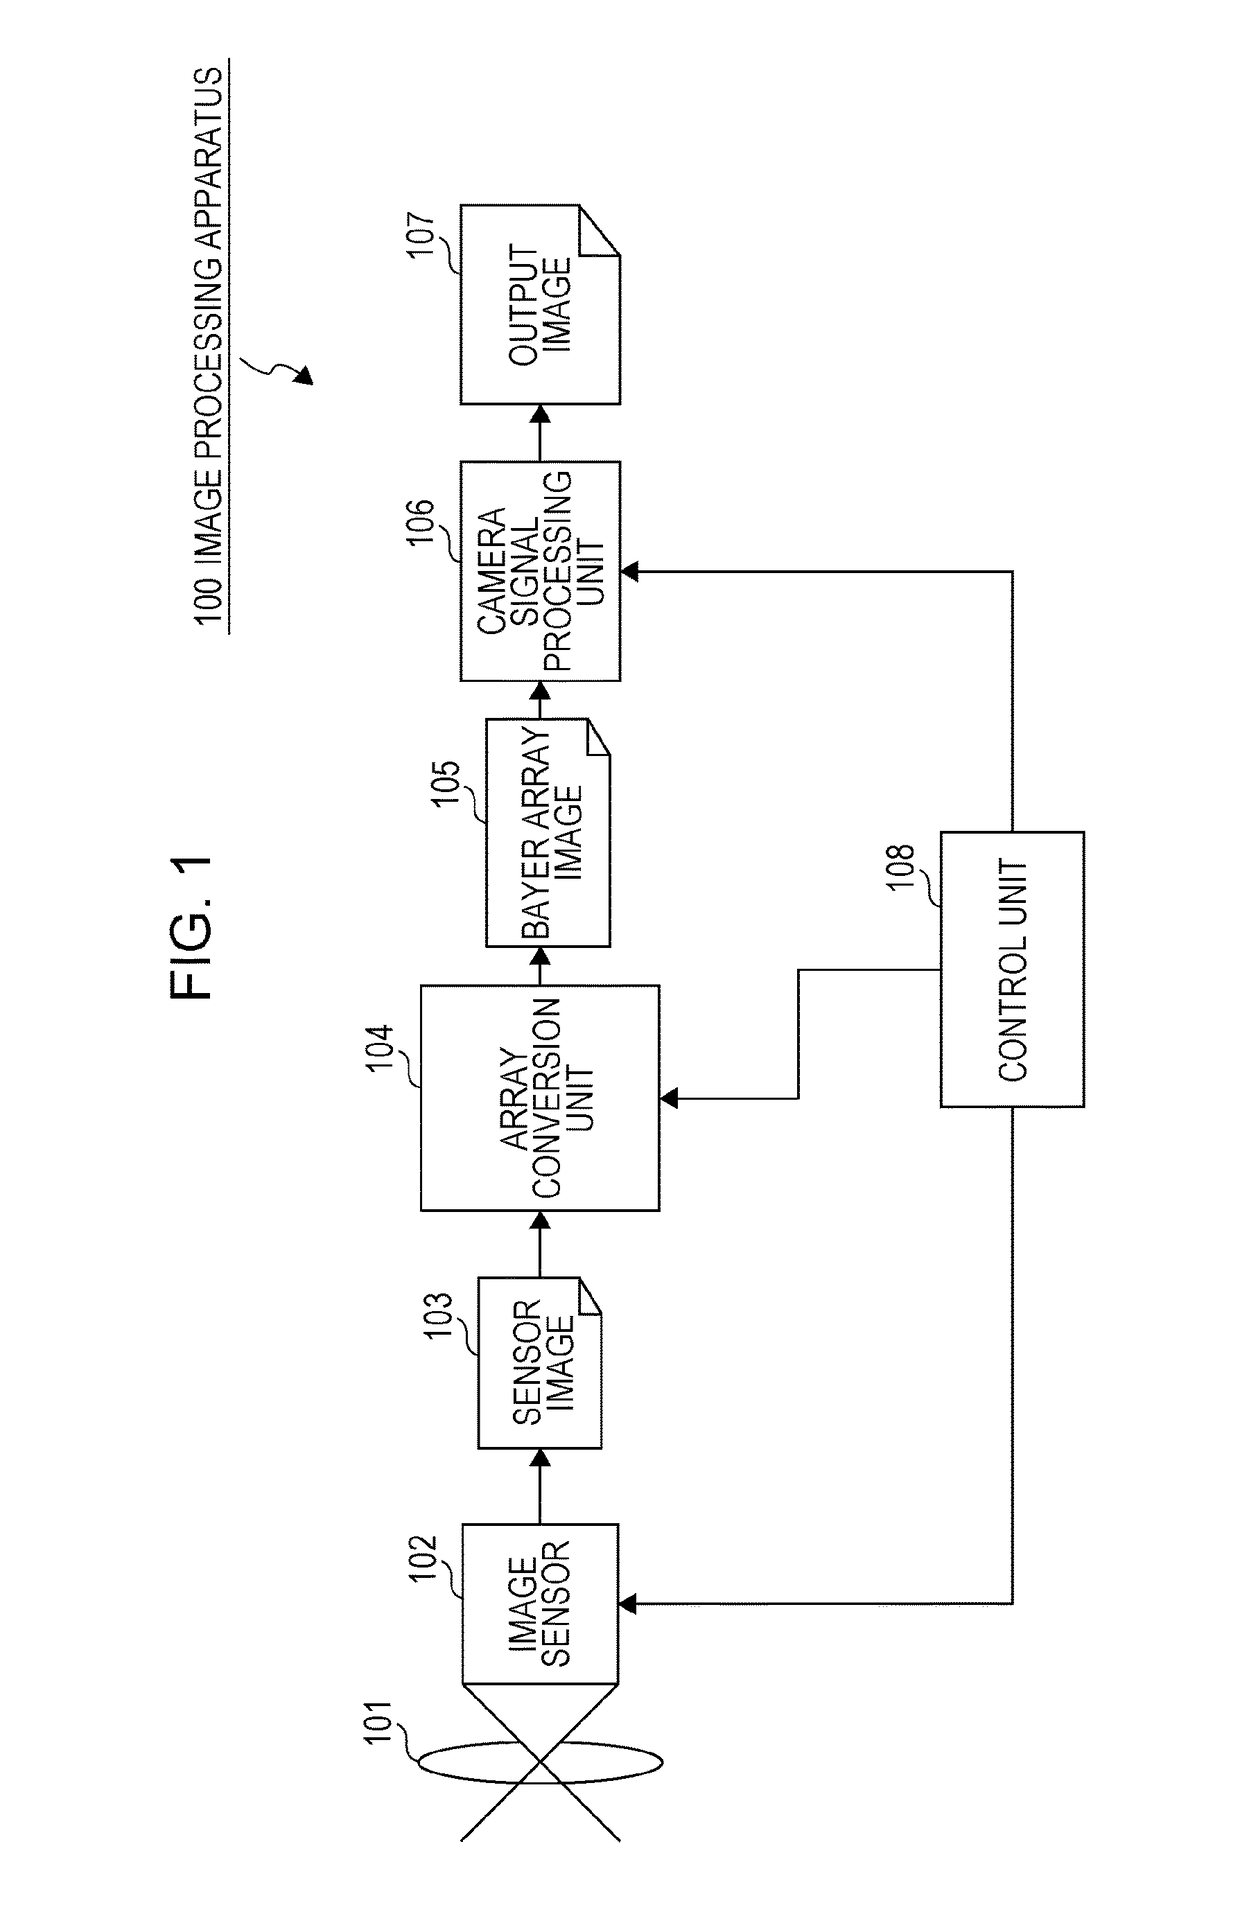 Image processing apparatus, imaging device, image processing method, and program for reducing noise or false colors in an image